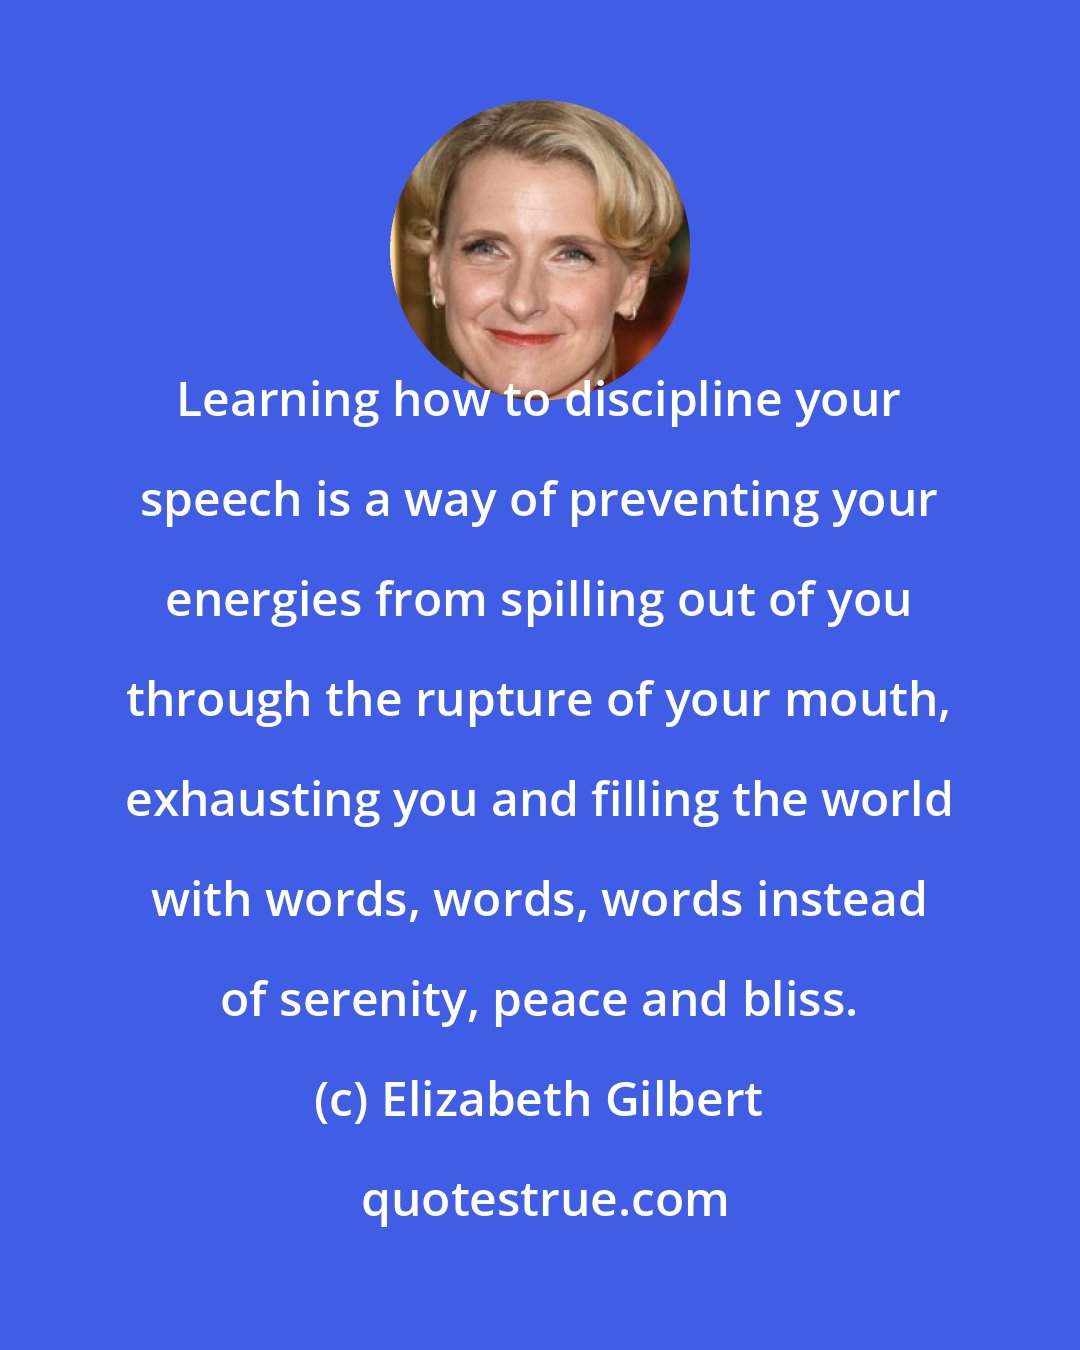 Elizabeth Gilbert: Learning how to discipline your speech is a way of preventing your energies from spilling out of you through the rupture of your mouth, exhausting you and filling the world with words, words, words instead of serenity, peace and bliss.